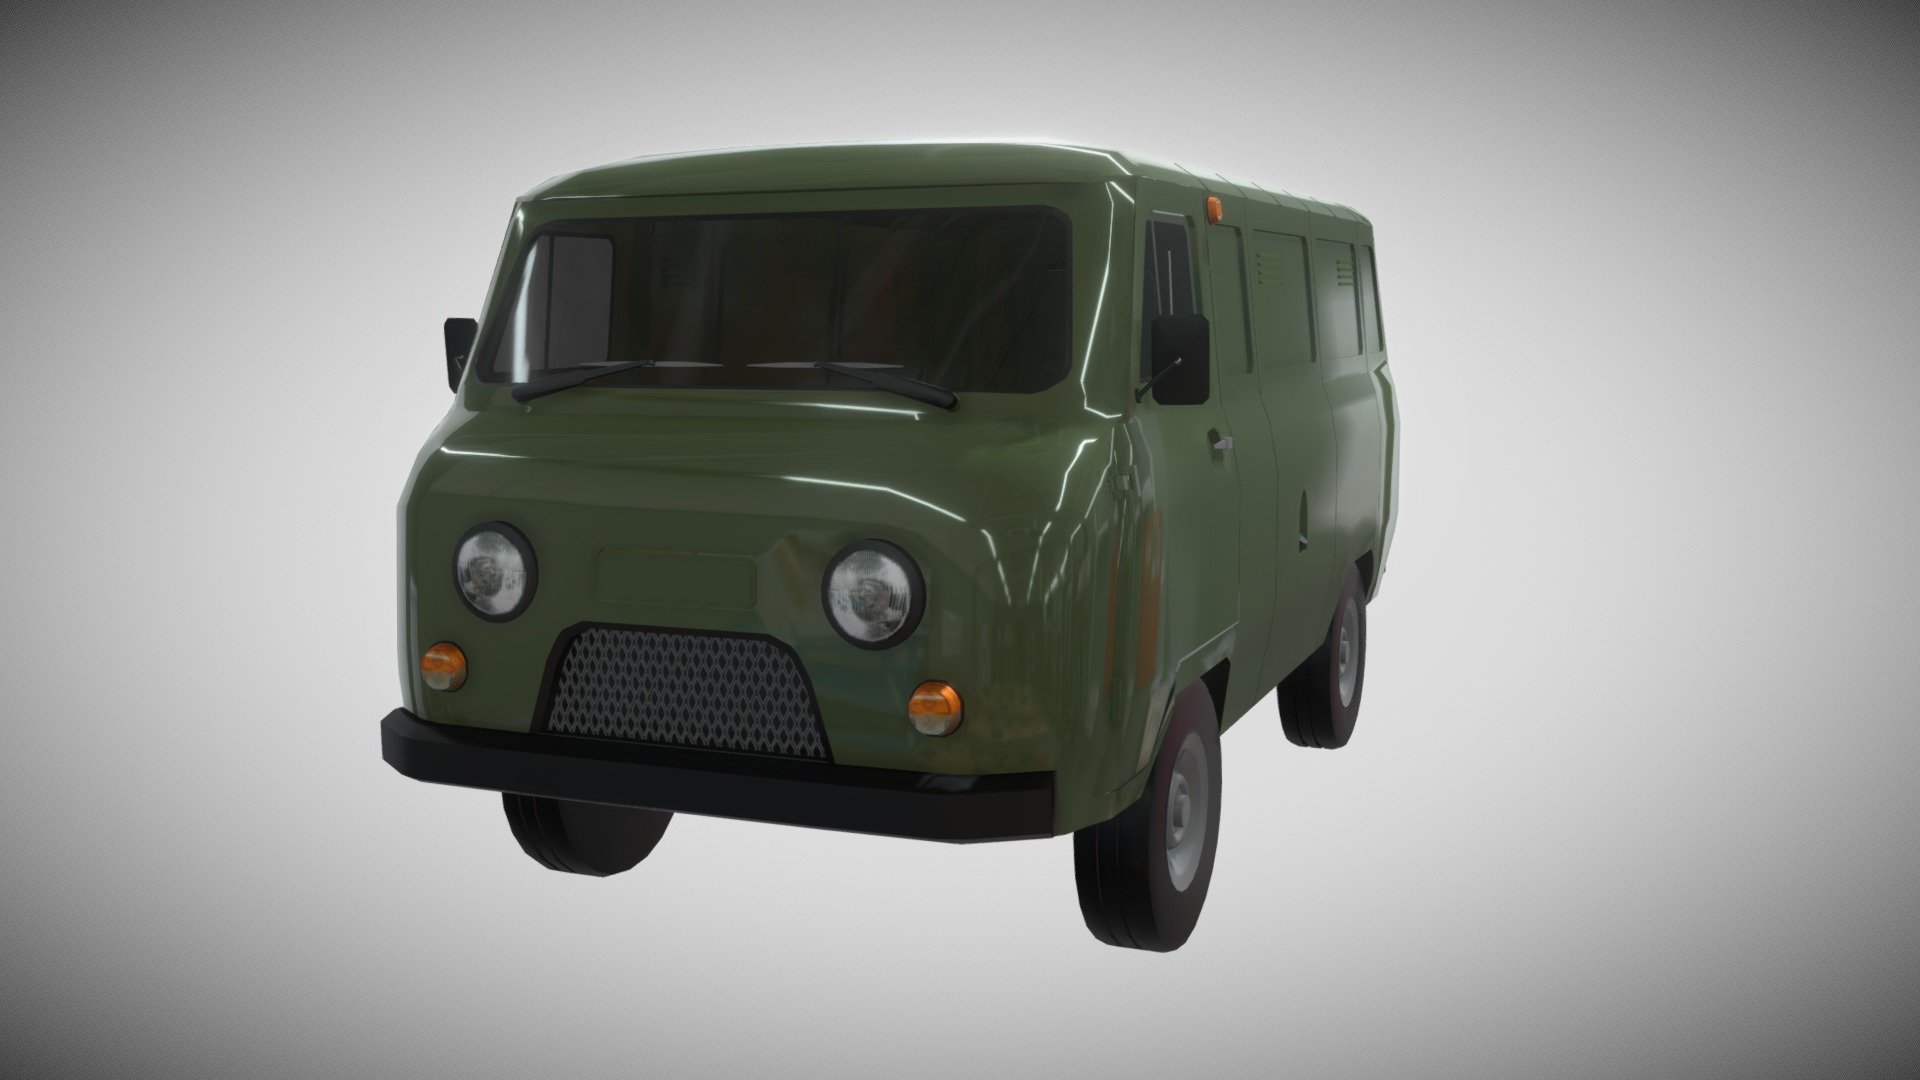 High - detailed blender 4.0 model of UAZ-452: legendary soviet light-weight minivan!

Military paint, 1970-s style.

Model doesn't includes interior, so all windows are closed) - UAZ 452 "БУХАНКА" - Download Free 3D model by Andrewans 3d model